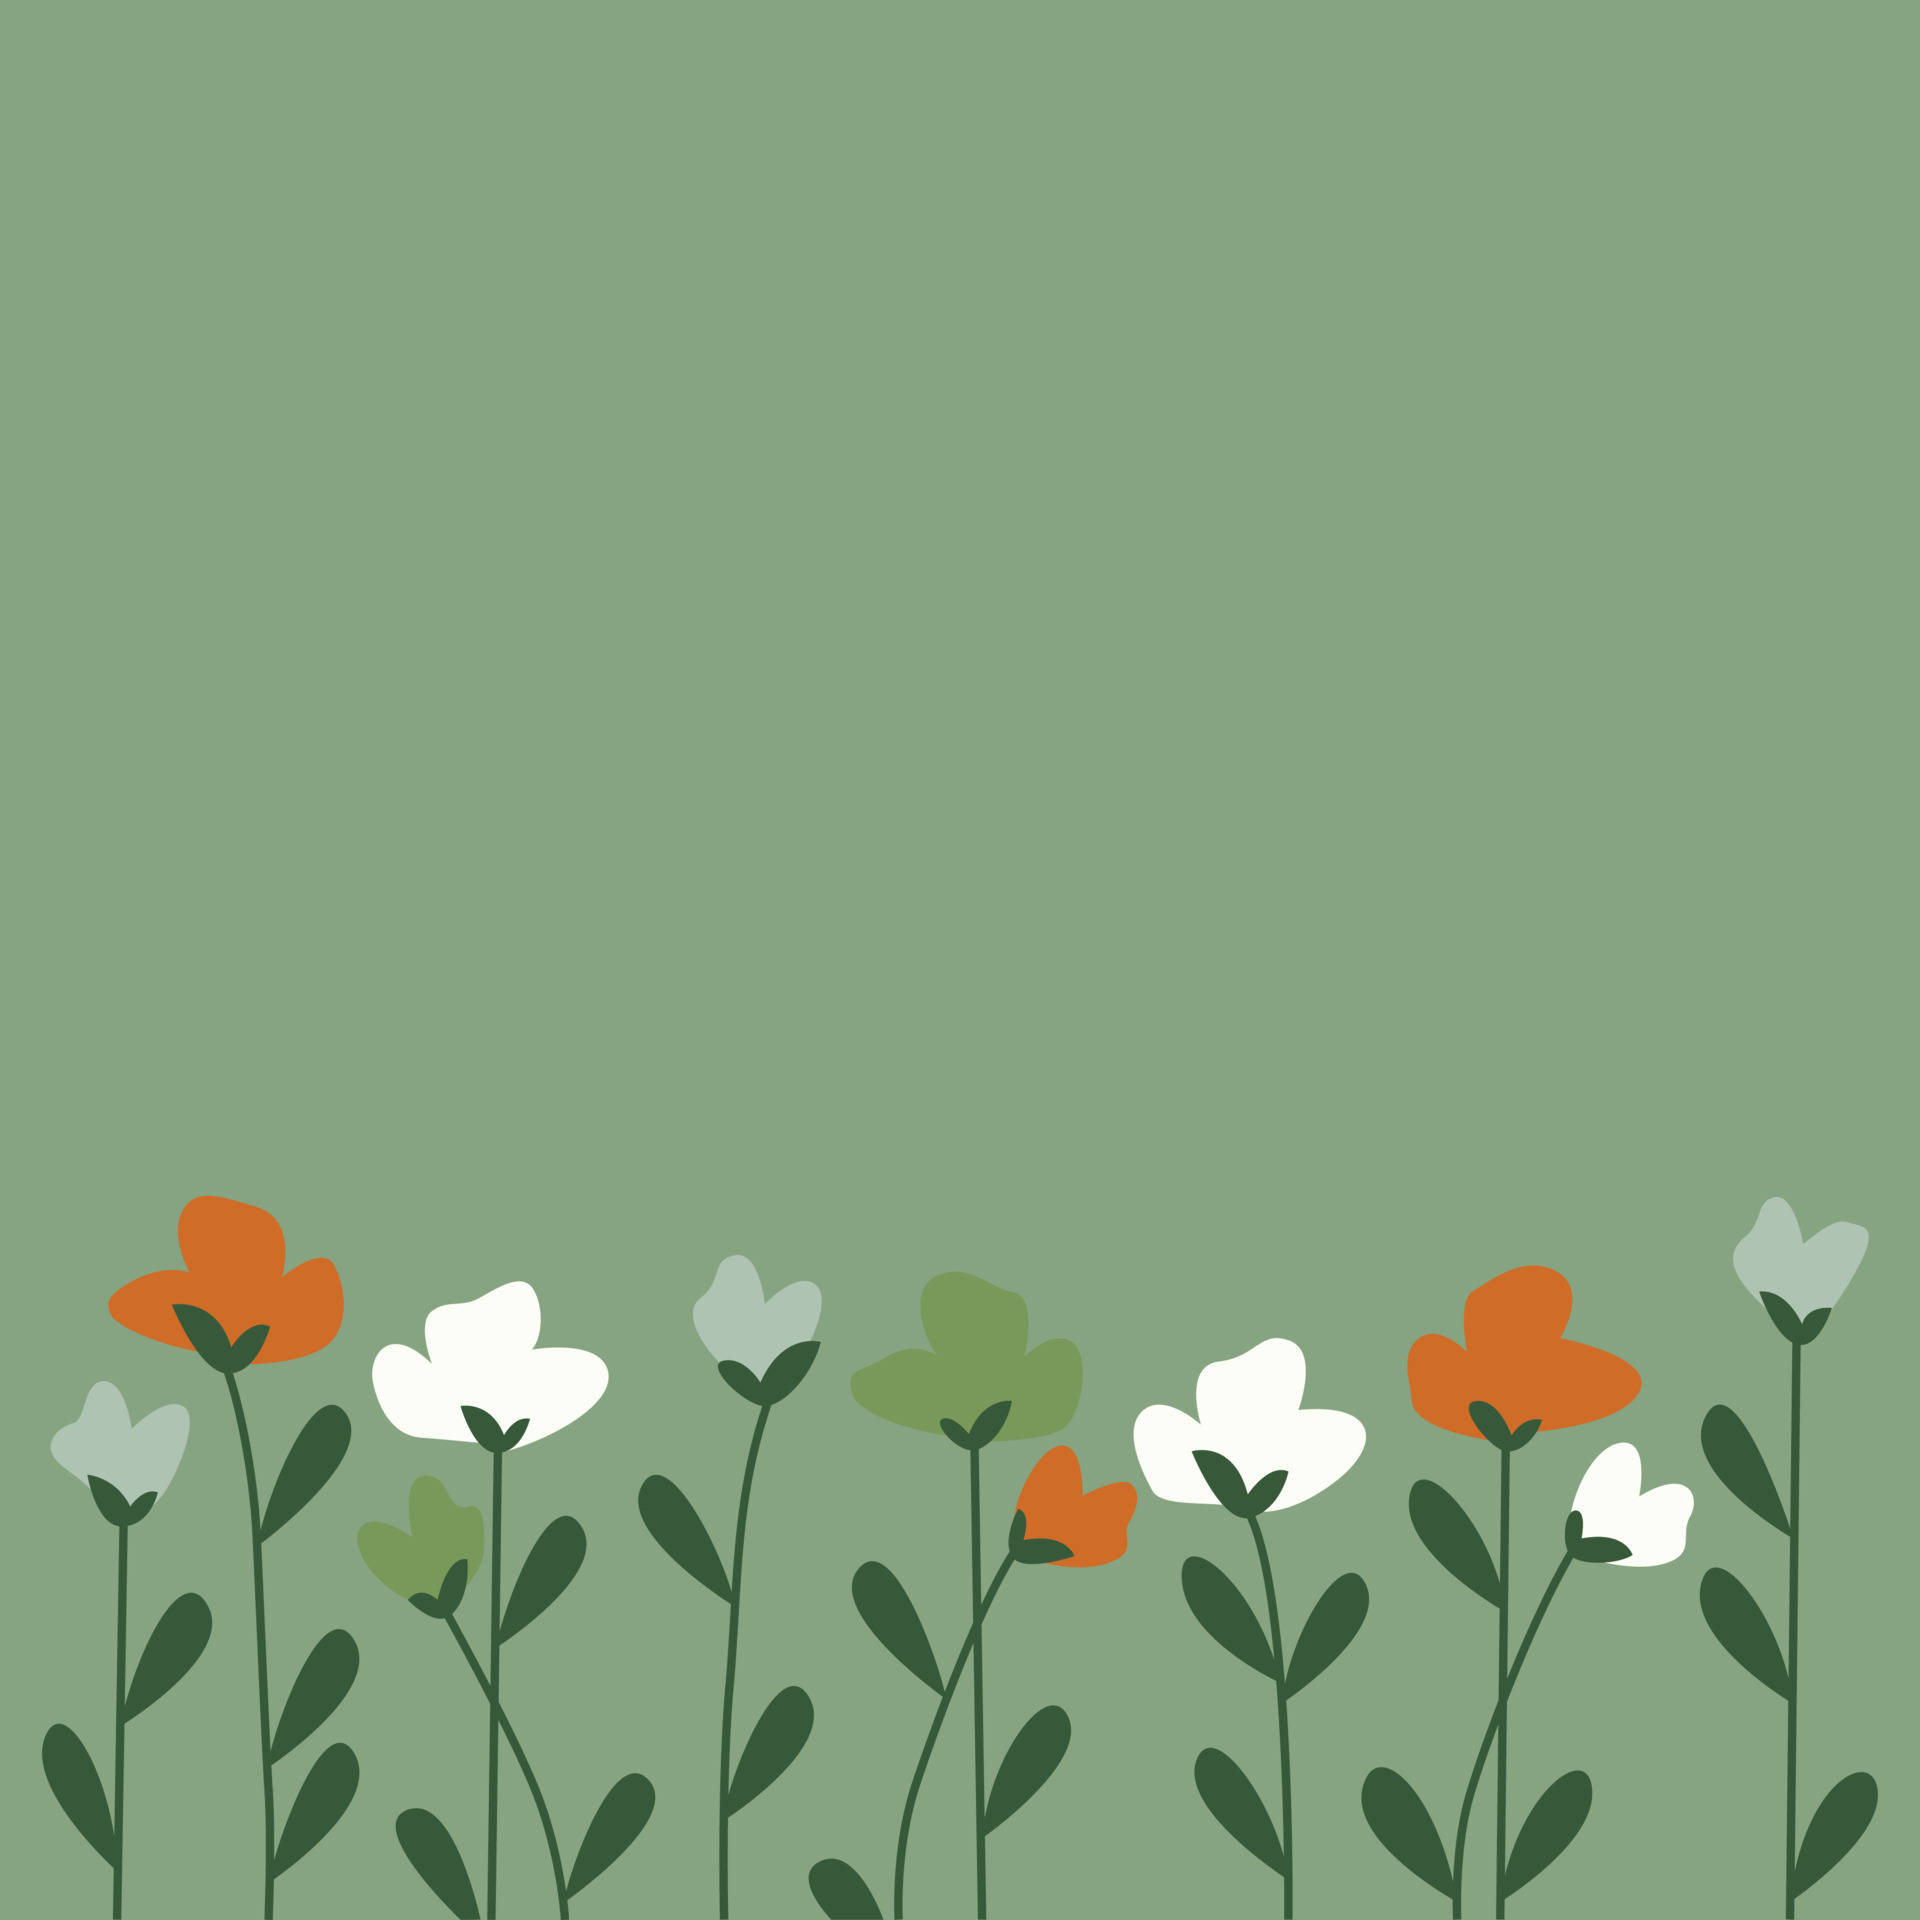 Get creative with technology and nature with this minimalist flower computer wallpaper. Wallpaper